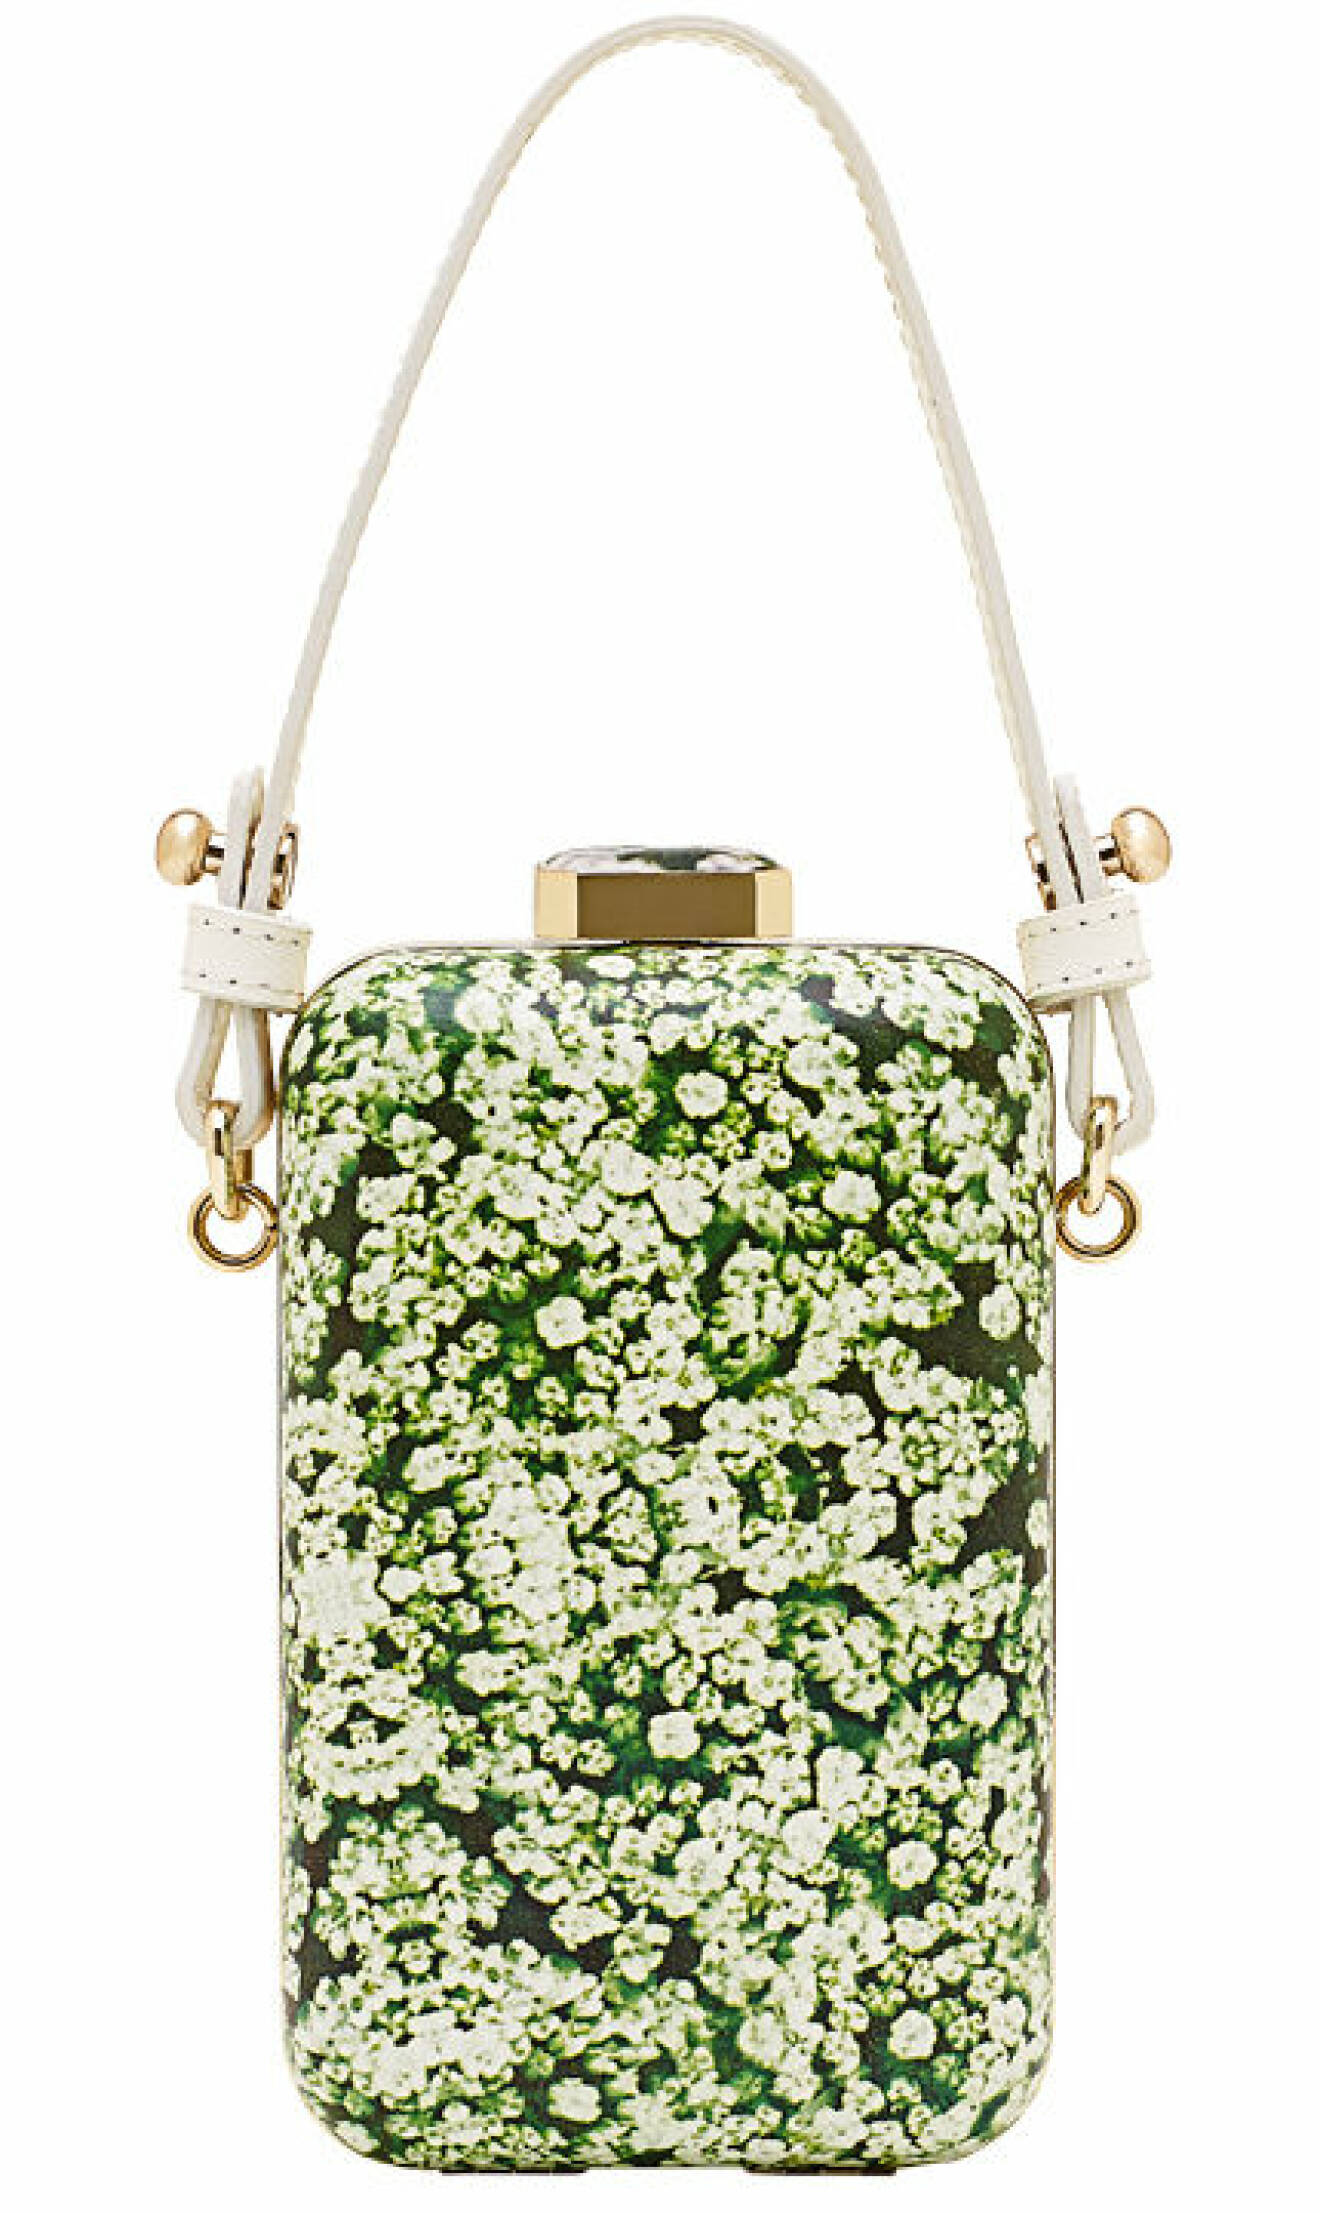 Tory Burch TB_Queen_Anne's_Lace_Miniaudiere_in_Queen_Anne's_Lace